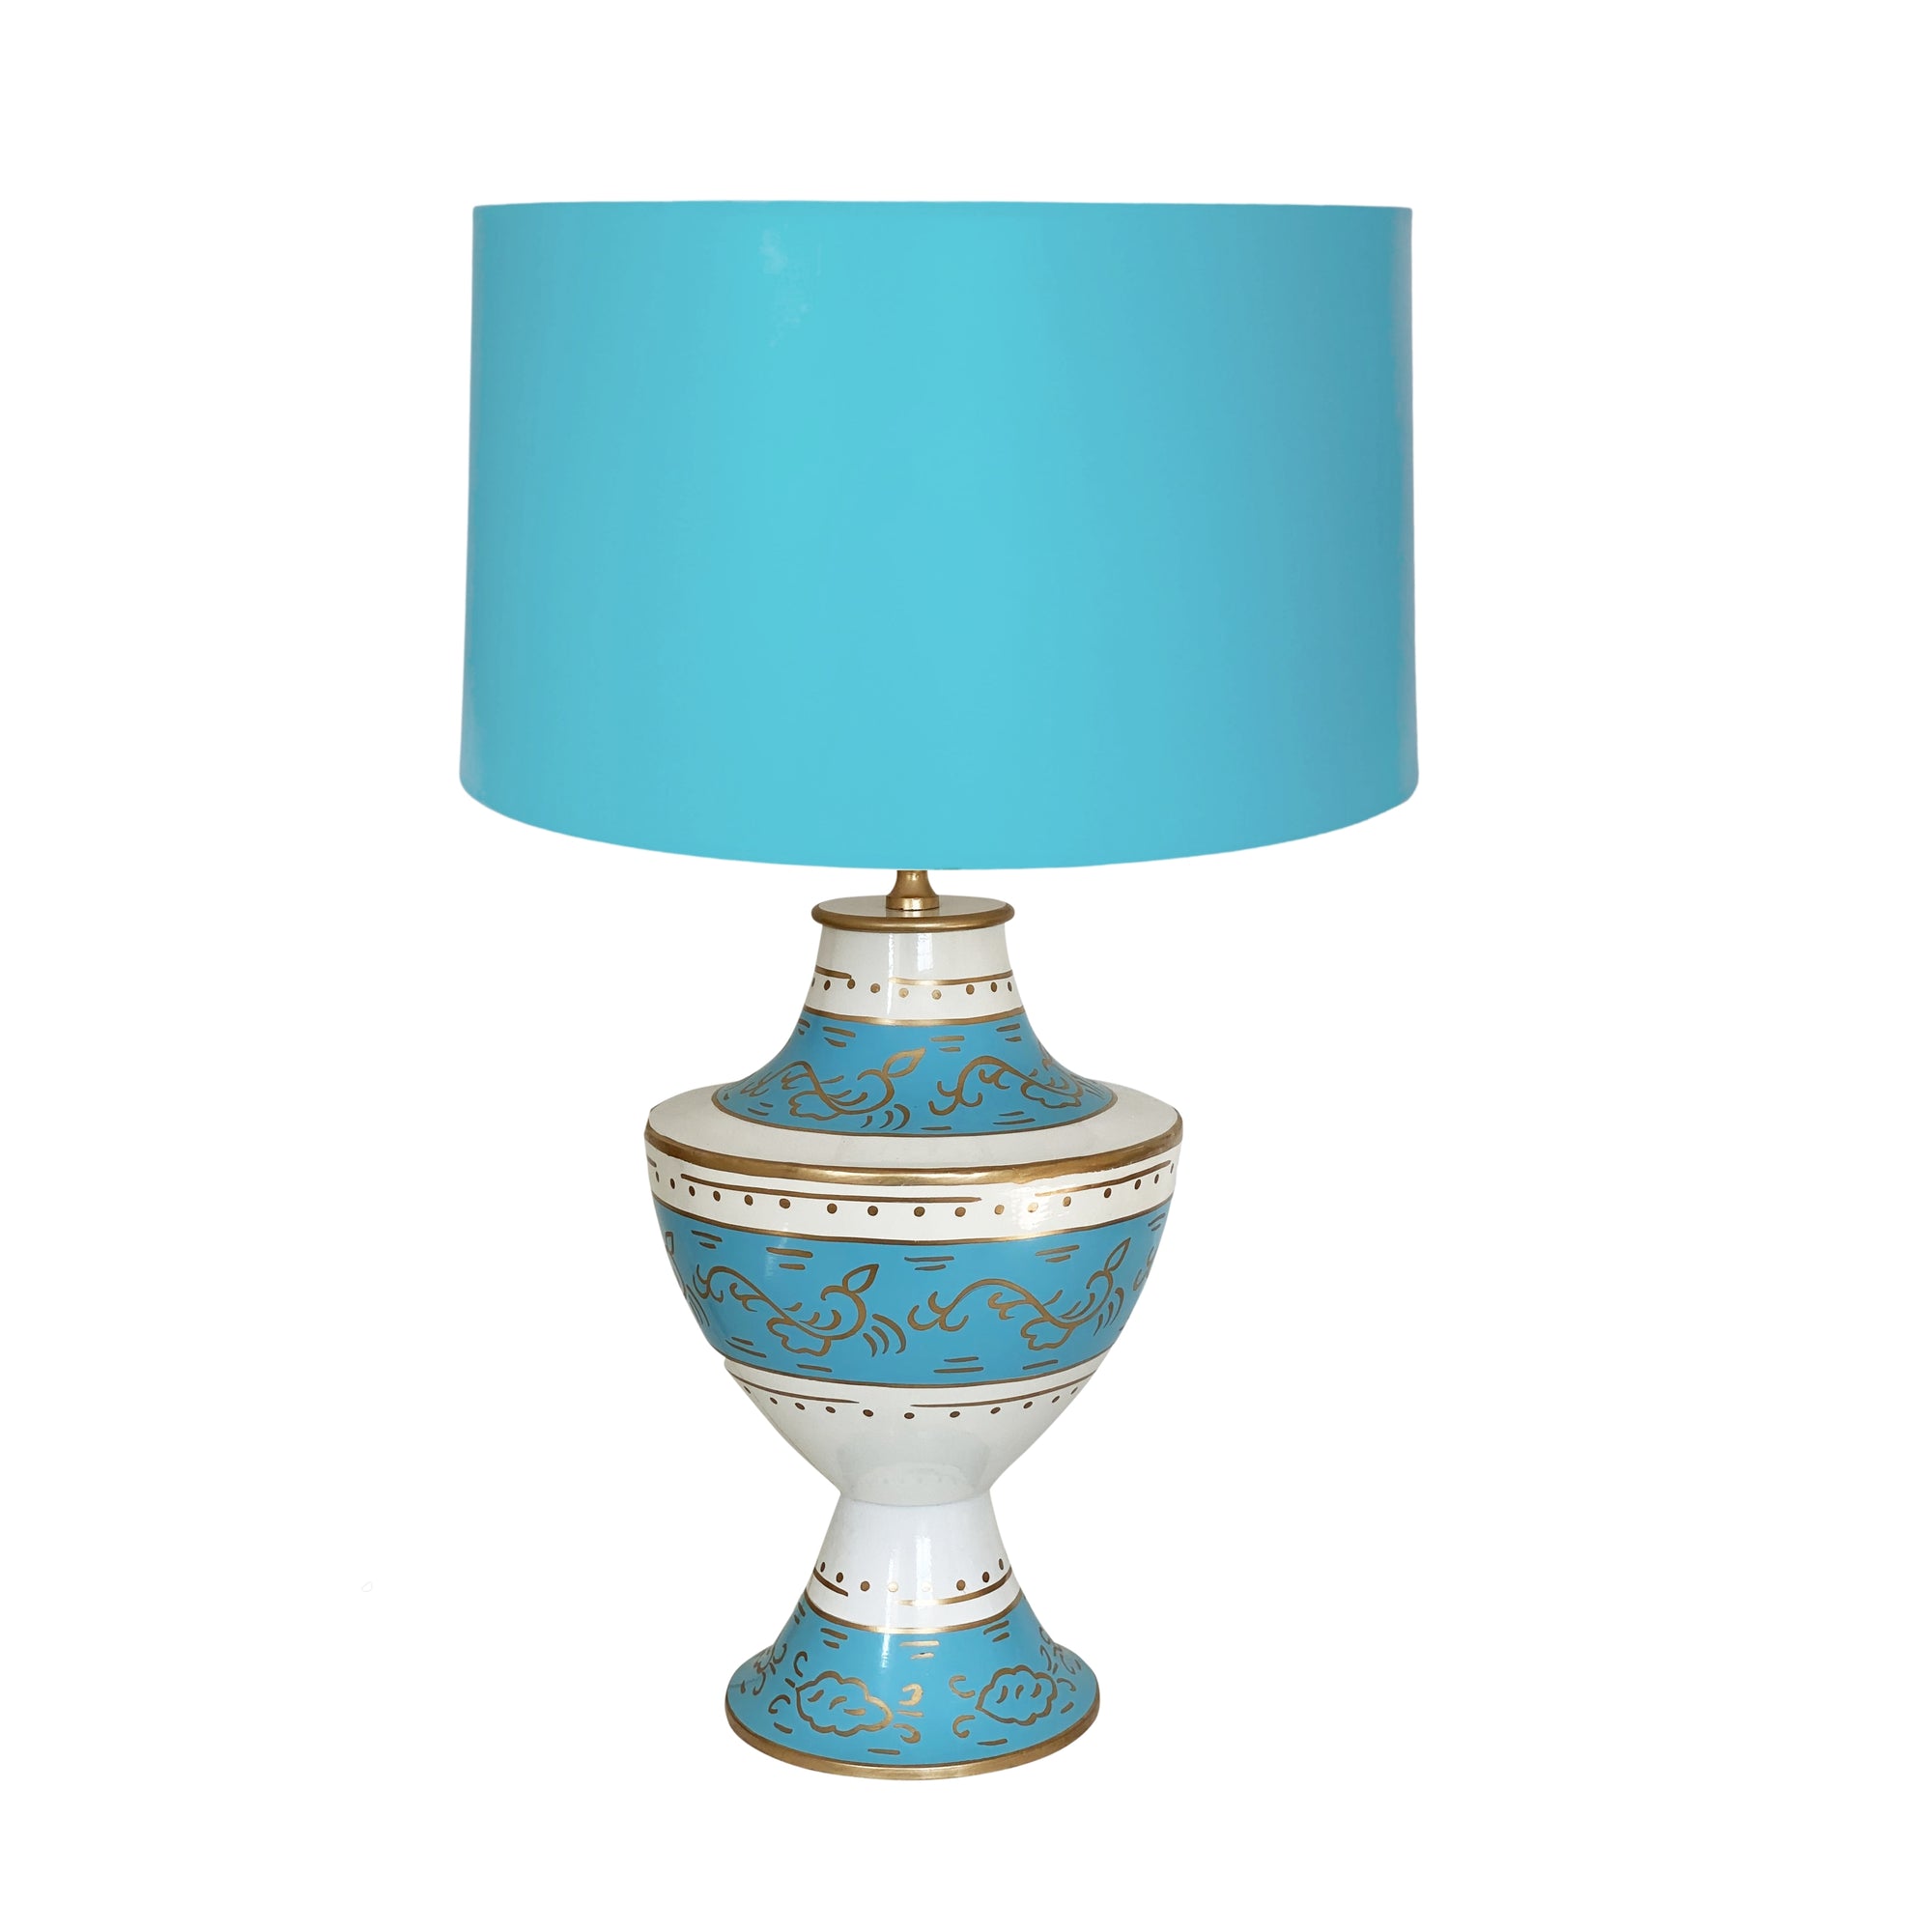 Dana Gibson Klismos in Jules Lamp with Solid Turquoise Shade